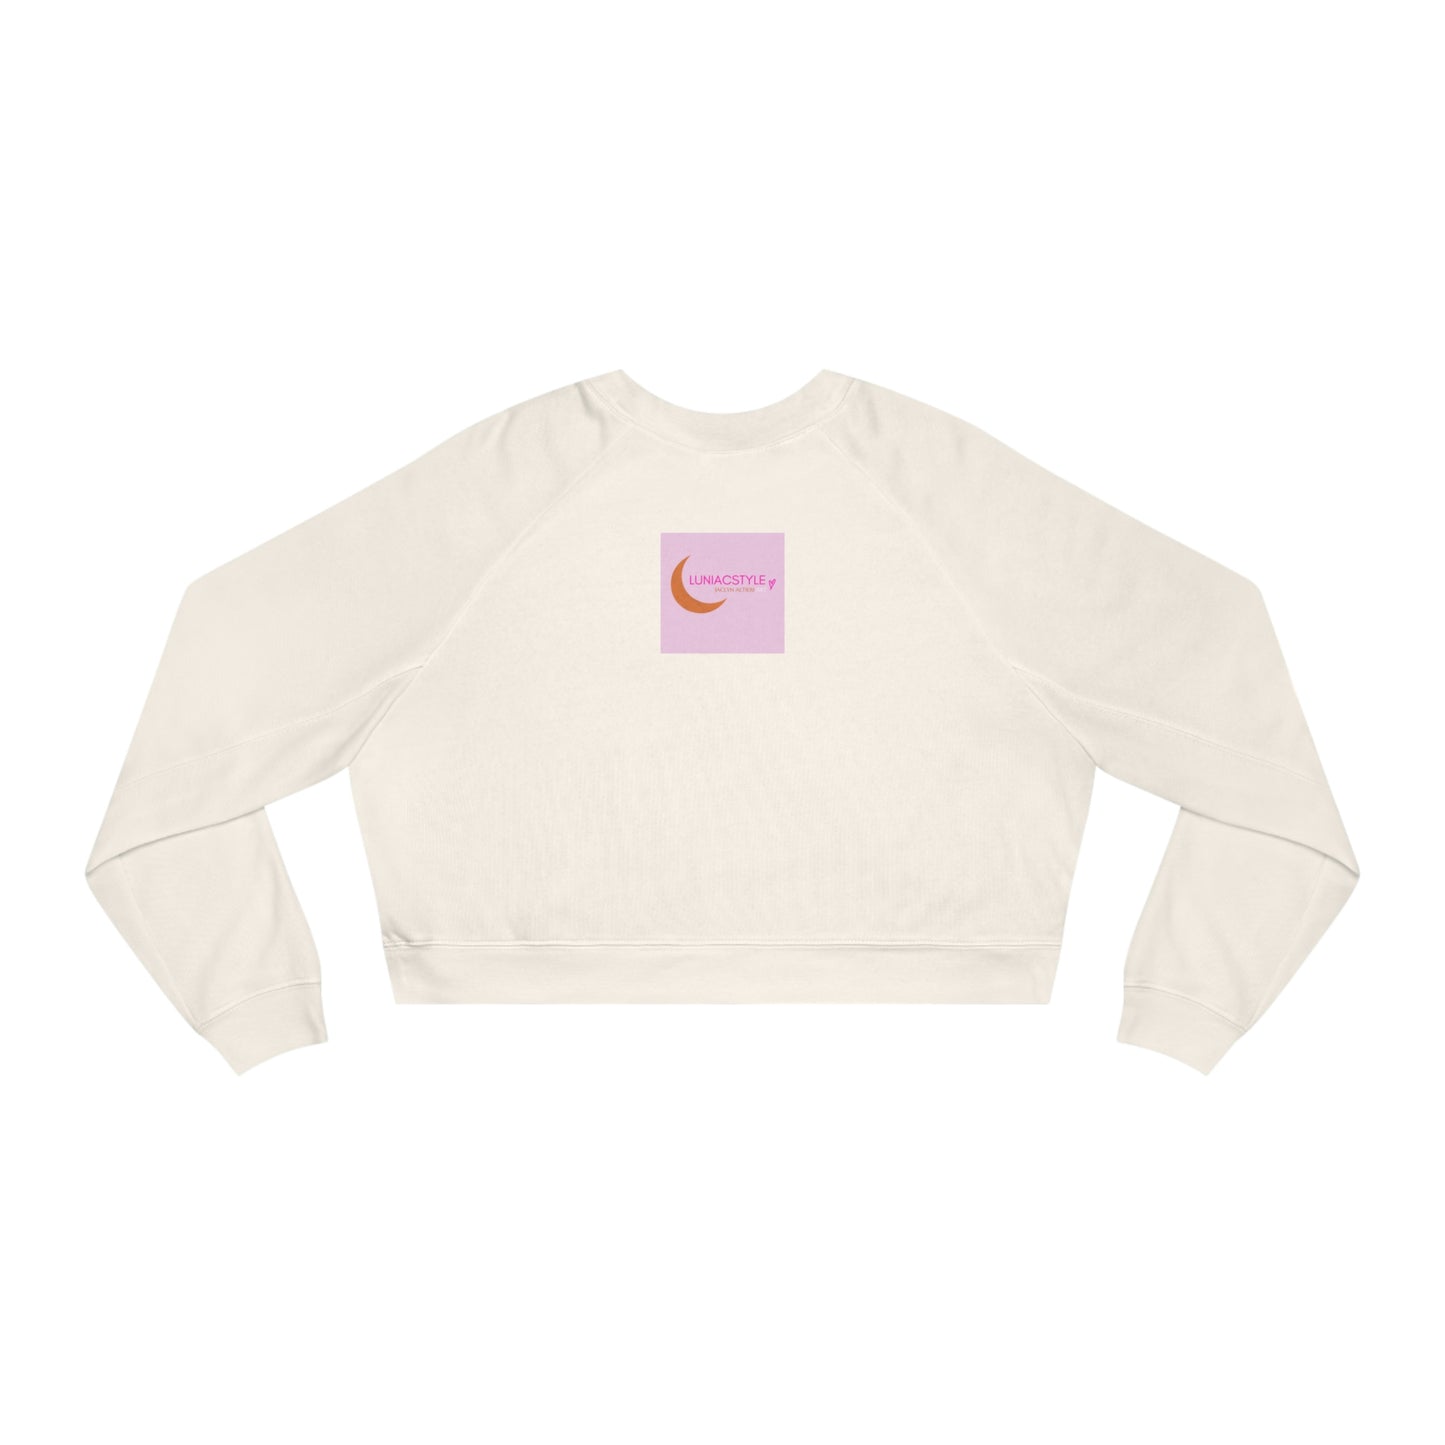 "STATE OF GRACE" Women's Cropped Fleece Pullover